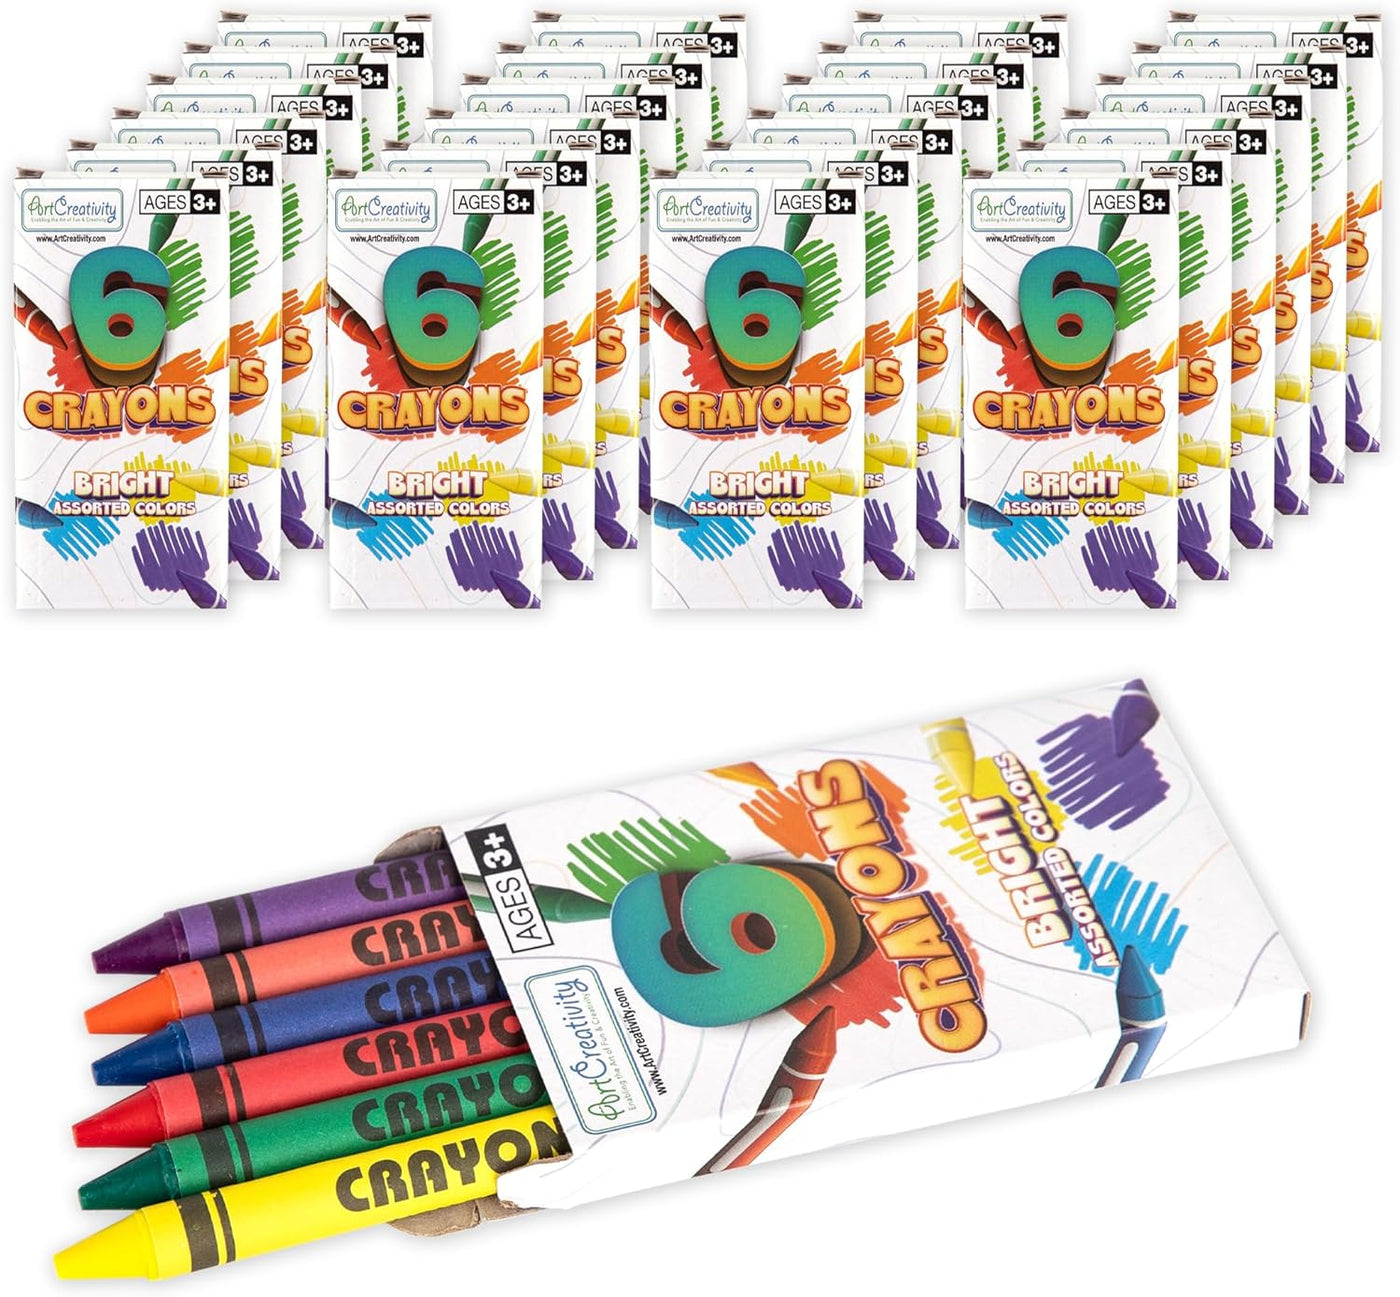 ArtCreativity Bulk Crayon Packs, 25 Sets of 6 Packs of Crayons (150ct), Classroom Crayons for Students, Non-Toxic Crayon Party Favors for Kids, Arts & Crafts Supplies 3+